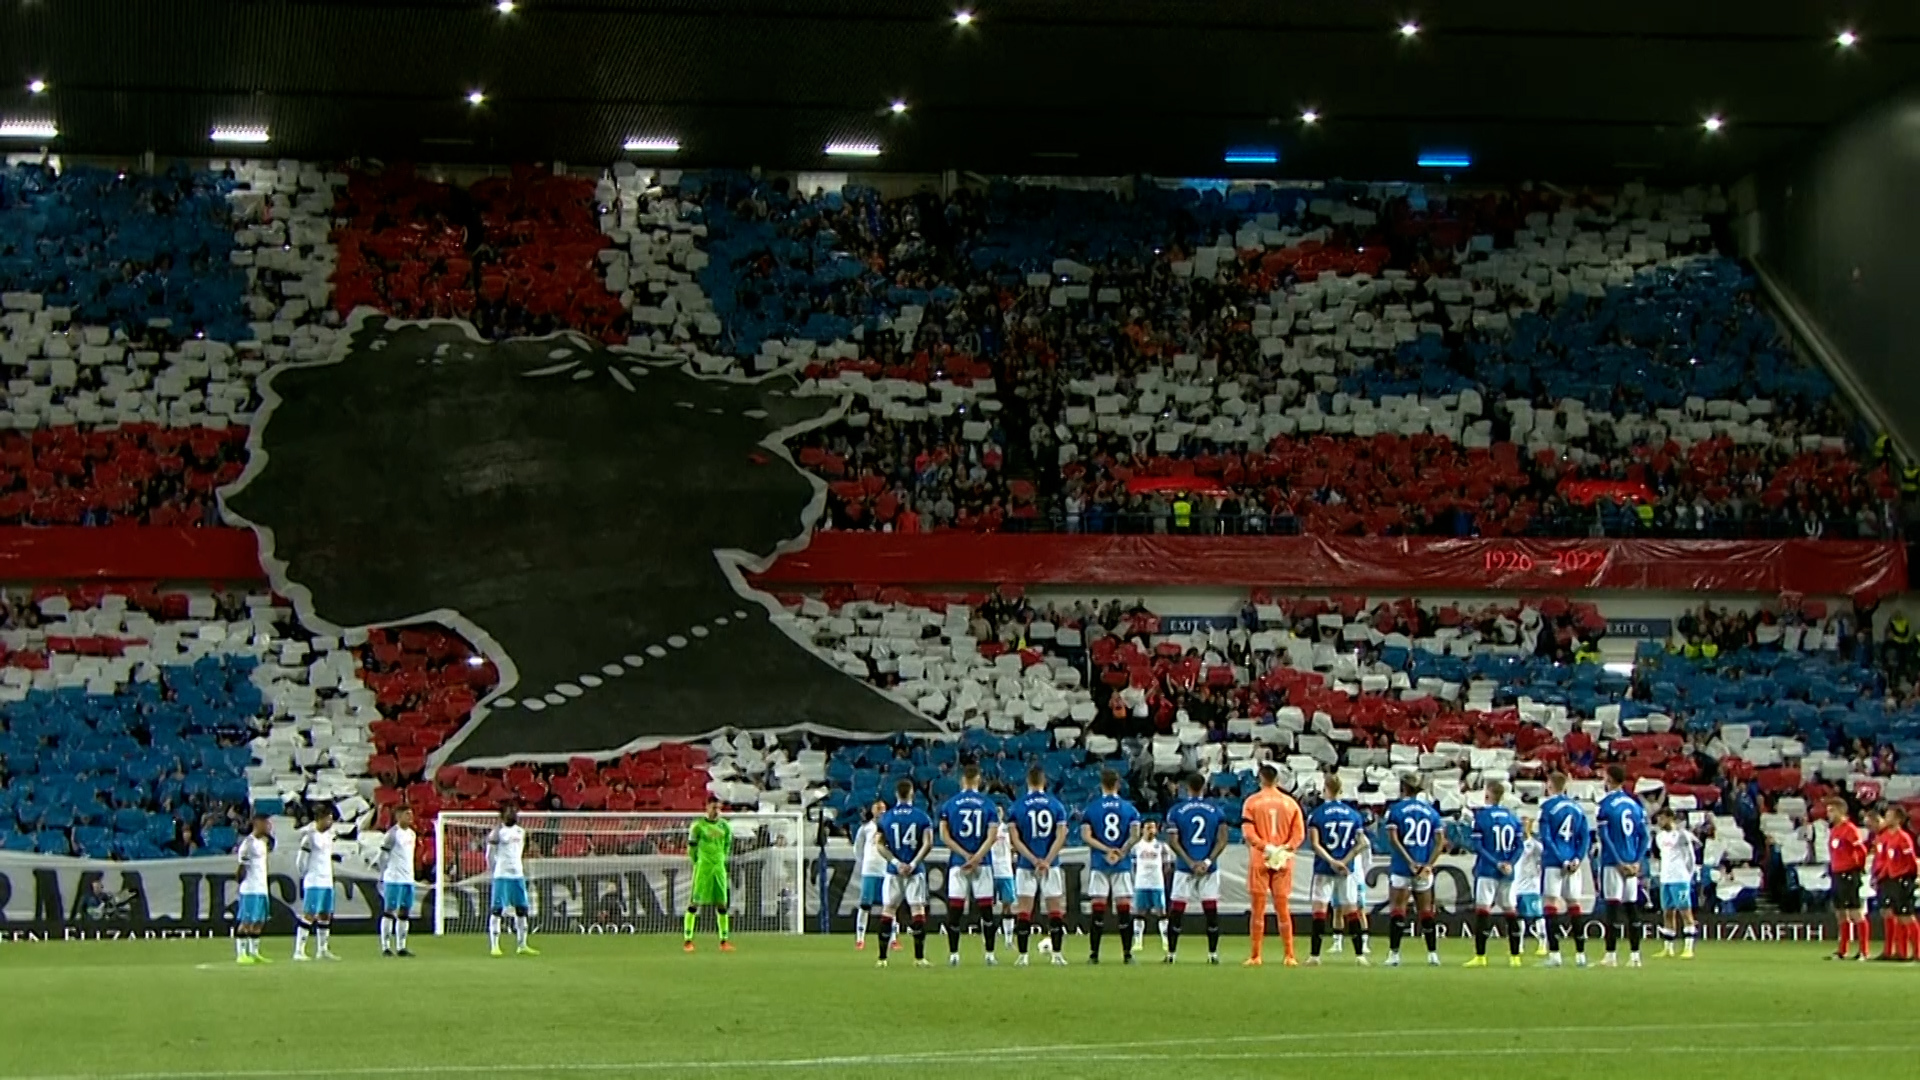 Rangers touching tribute to Queen Elizabeth during Champions League